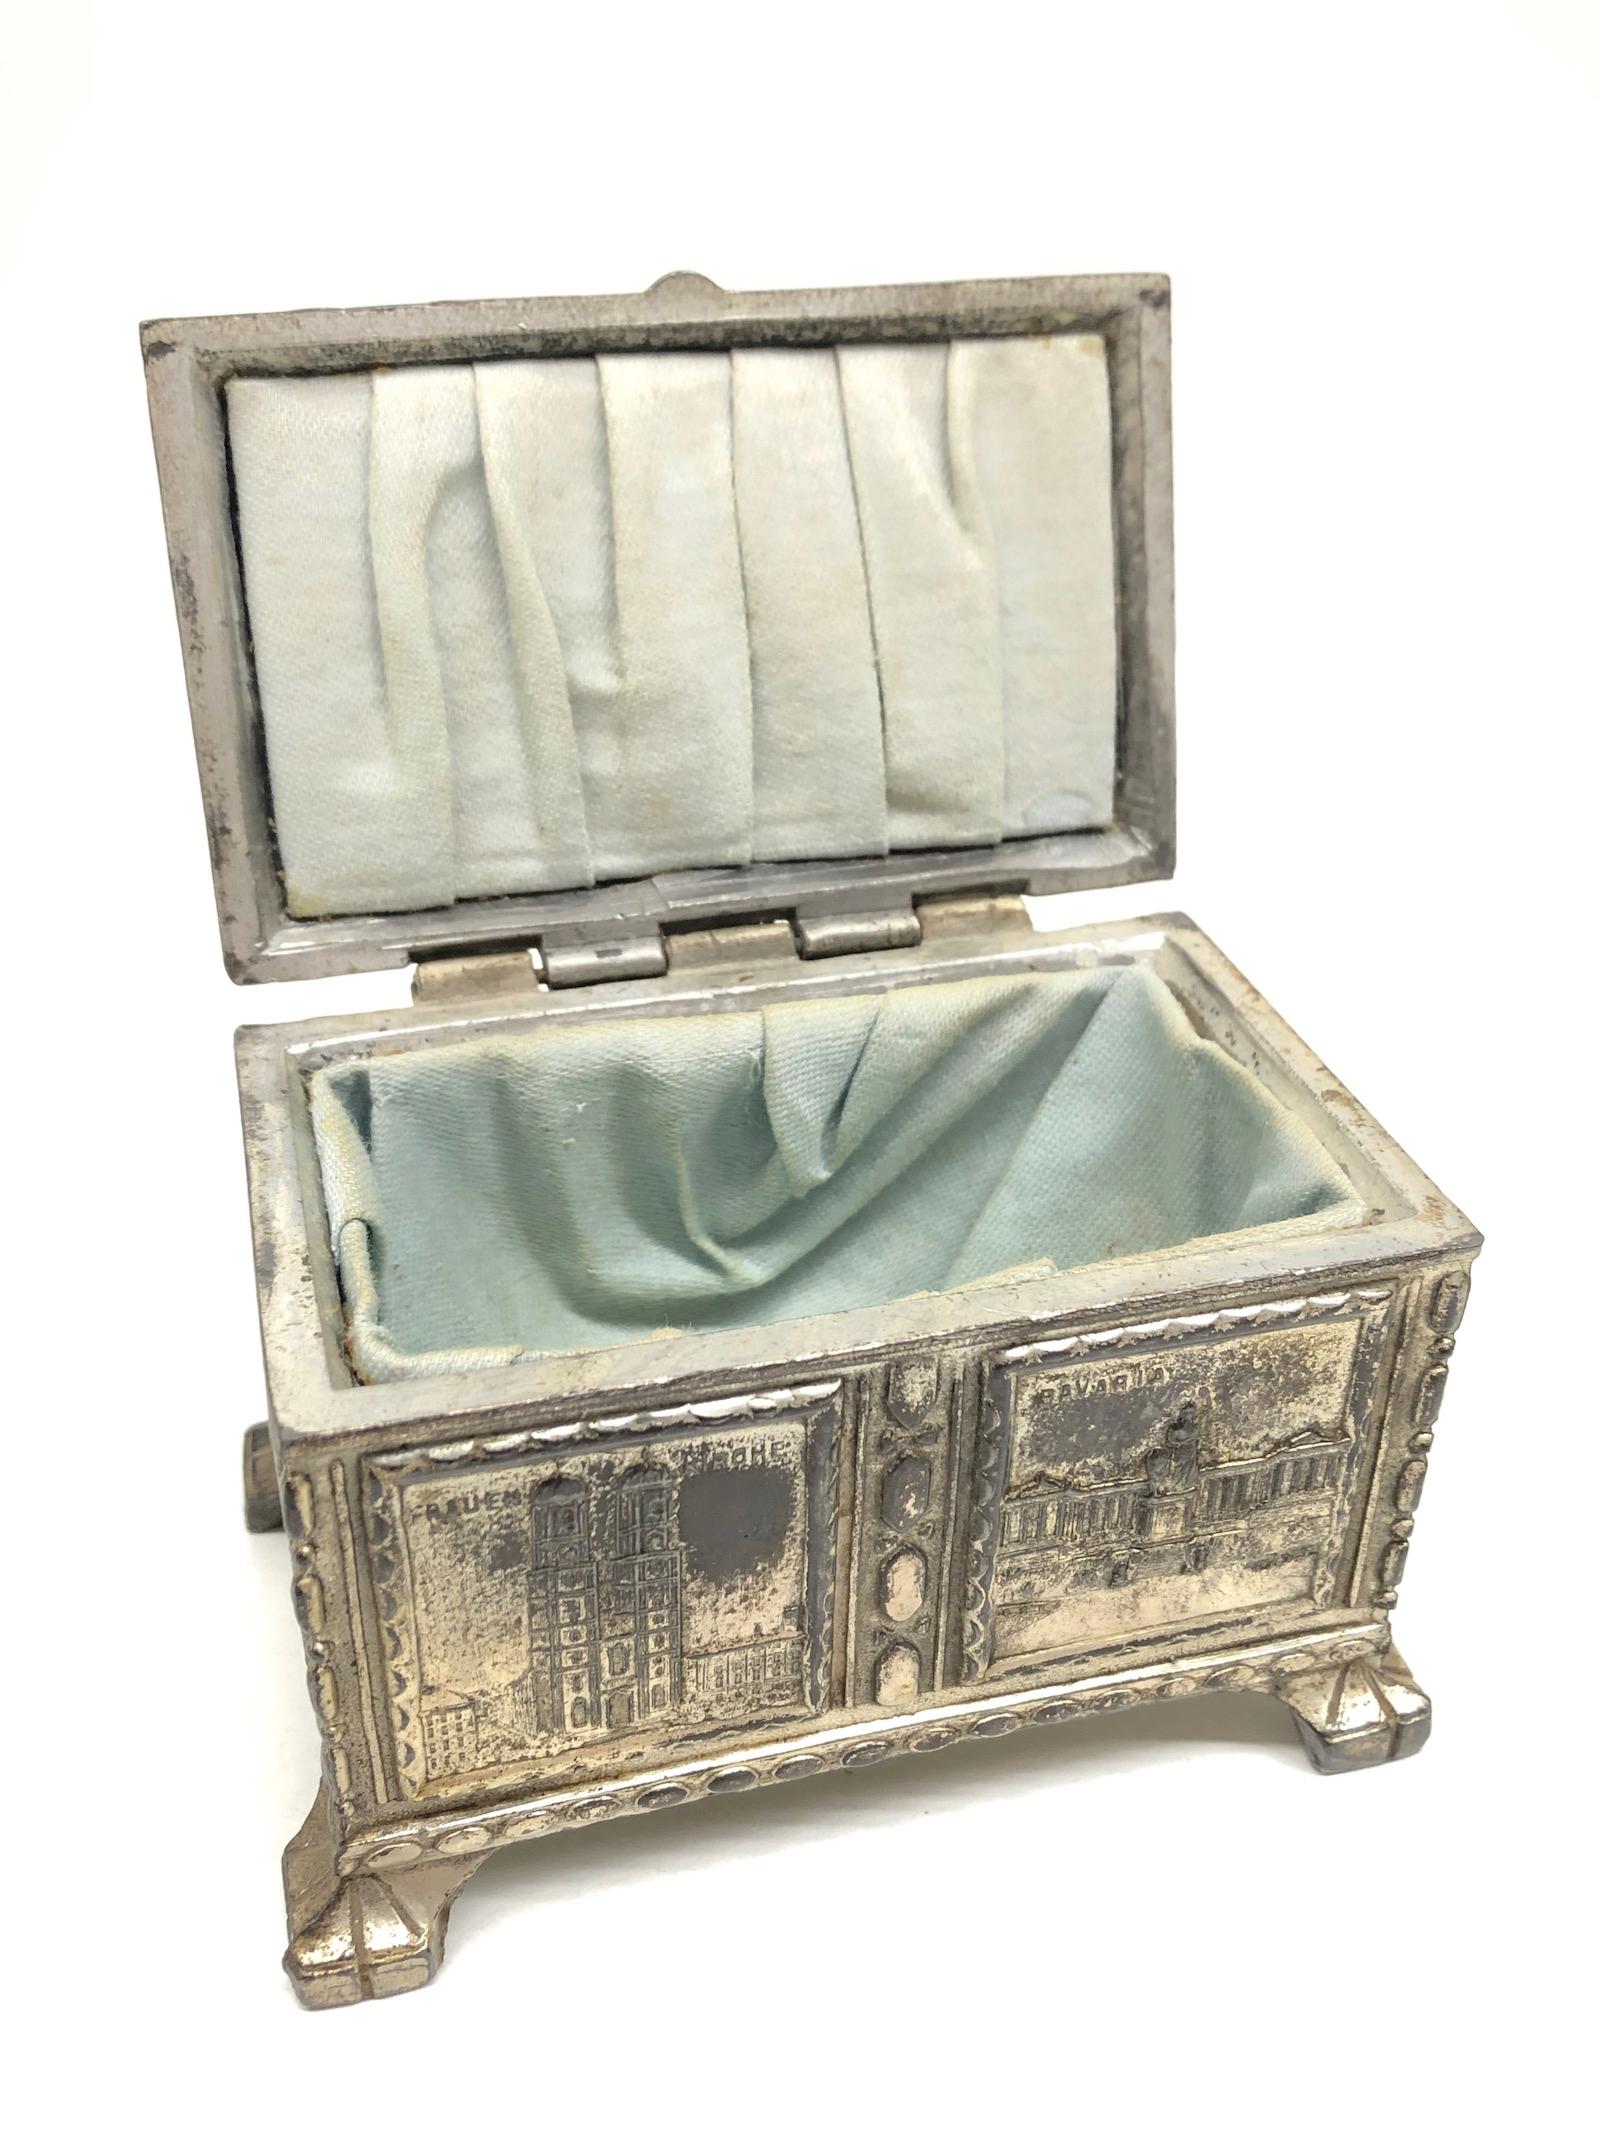 Beautiful Munich child souvenir trinket box, made of white metal. A beautiful nice addition to your vanity room.